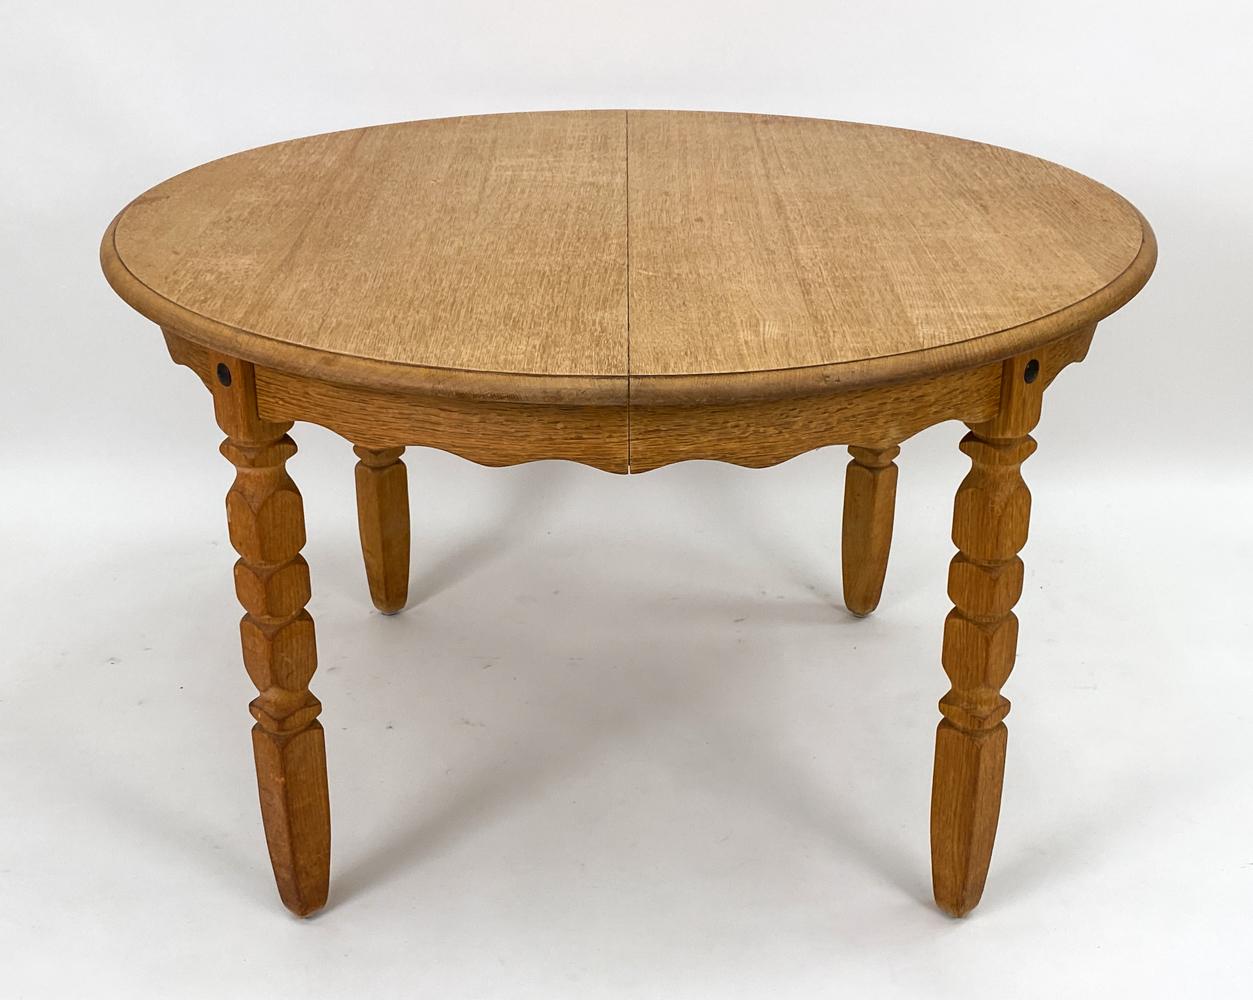 A Danish modern dining table in carved oak, designed by Henning Kjaernulf. No apparent labels. This Scandinavian modern table leans toward traditional farmhouse organic design making it a versatile piece for a multitude of interior aesthetics.